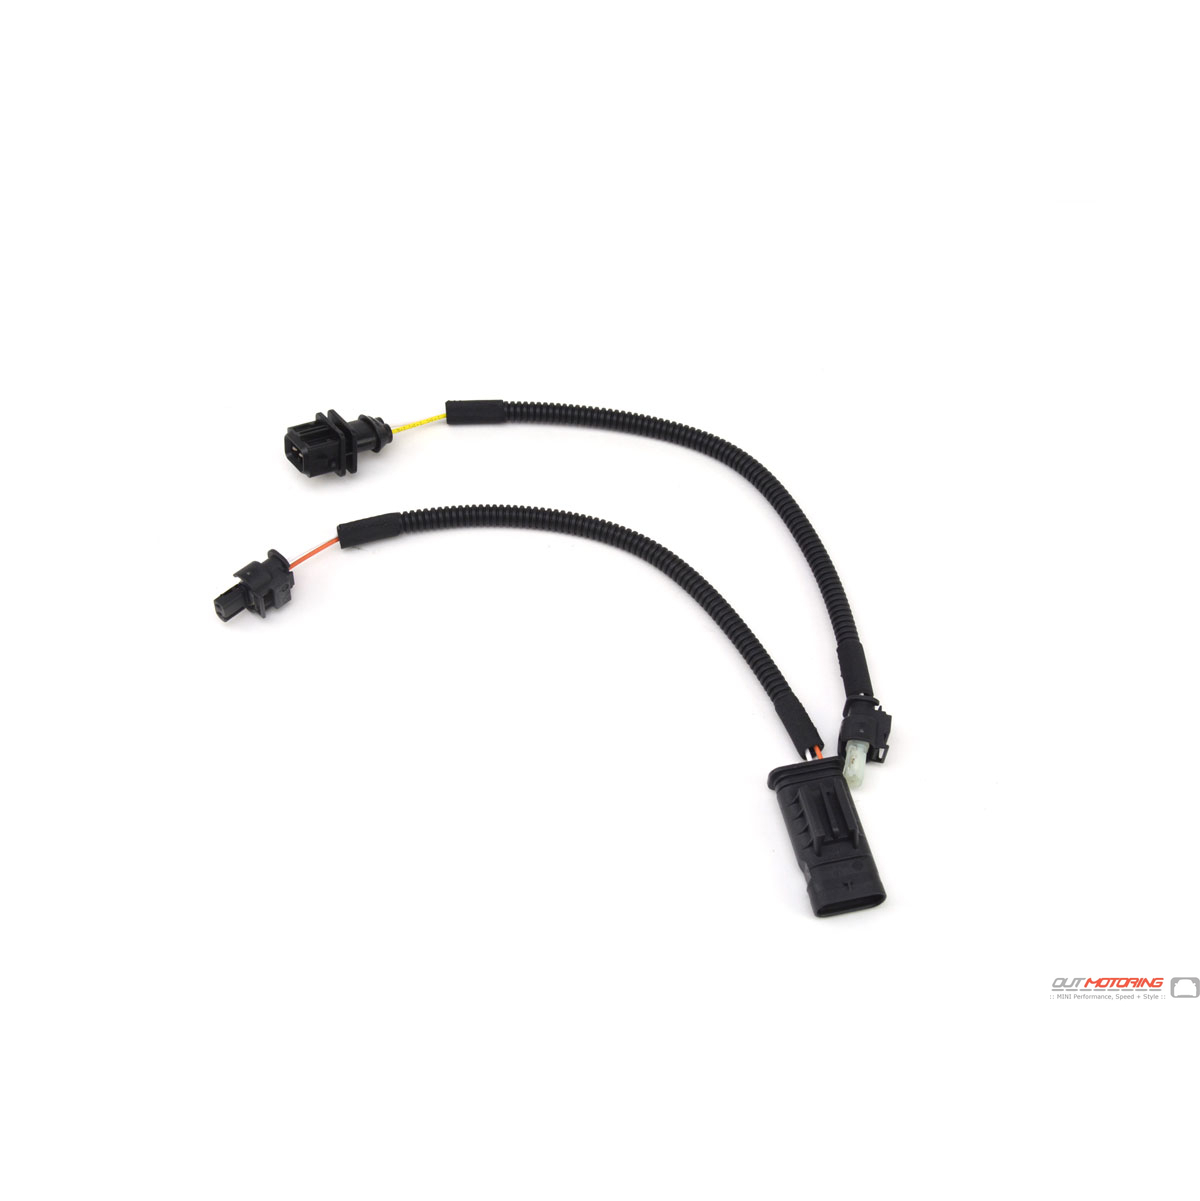 Boskavalo 12518611289 Coolant Thermostat Adapter Lead For Mini R56 R60 R61 Cooper Paceman Countryman 